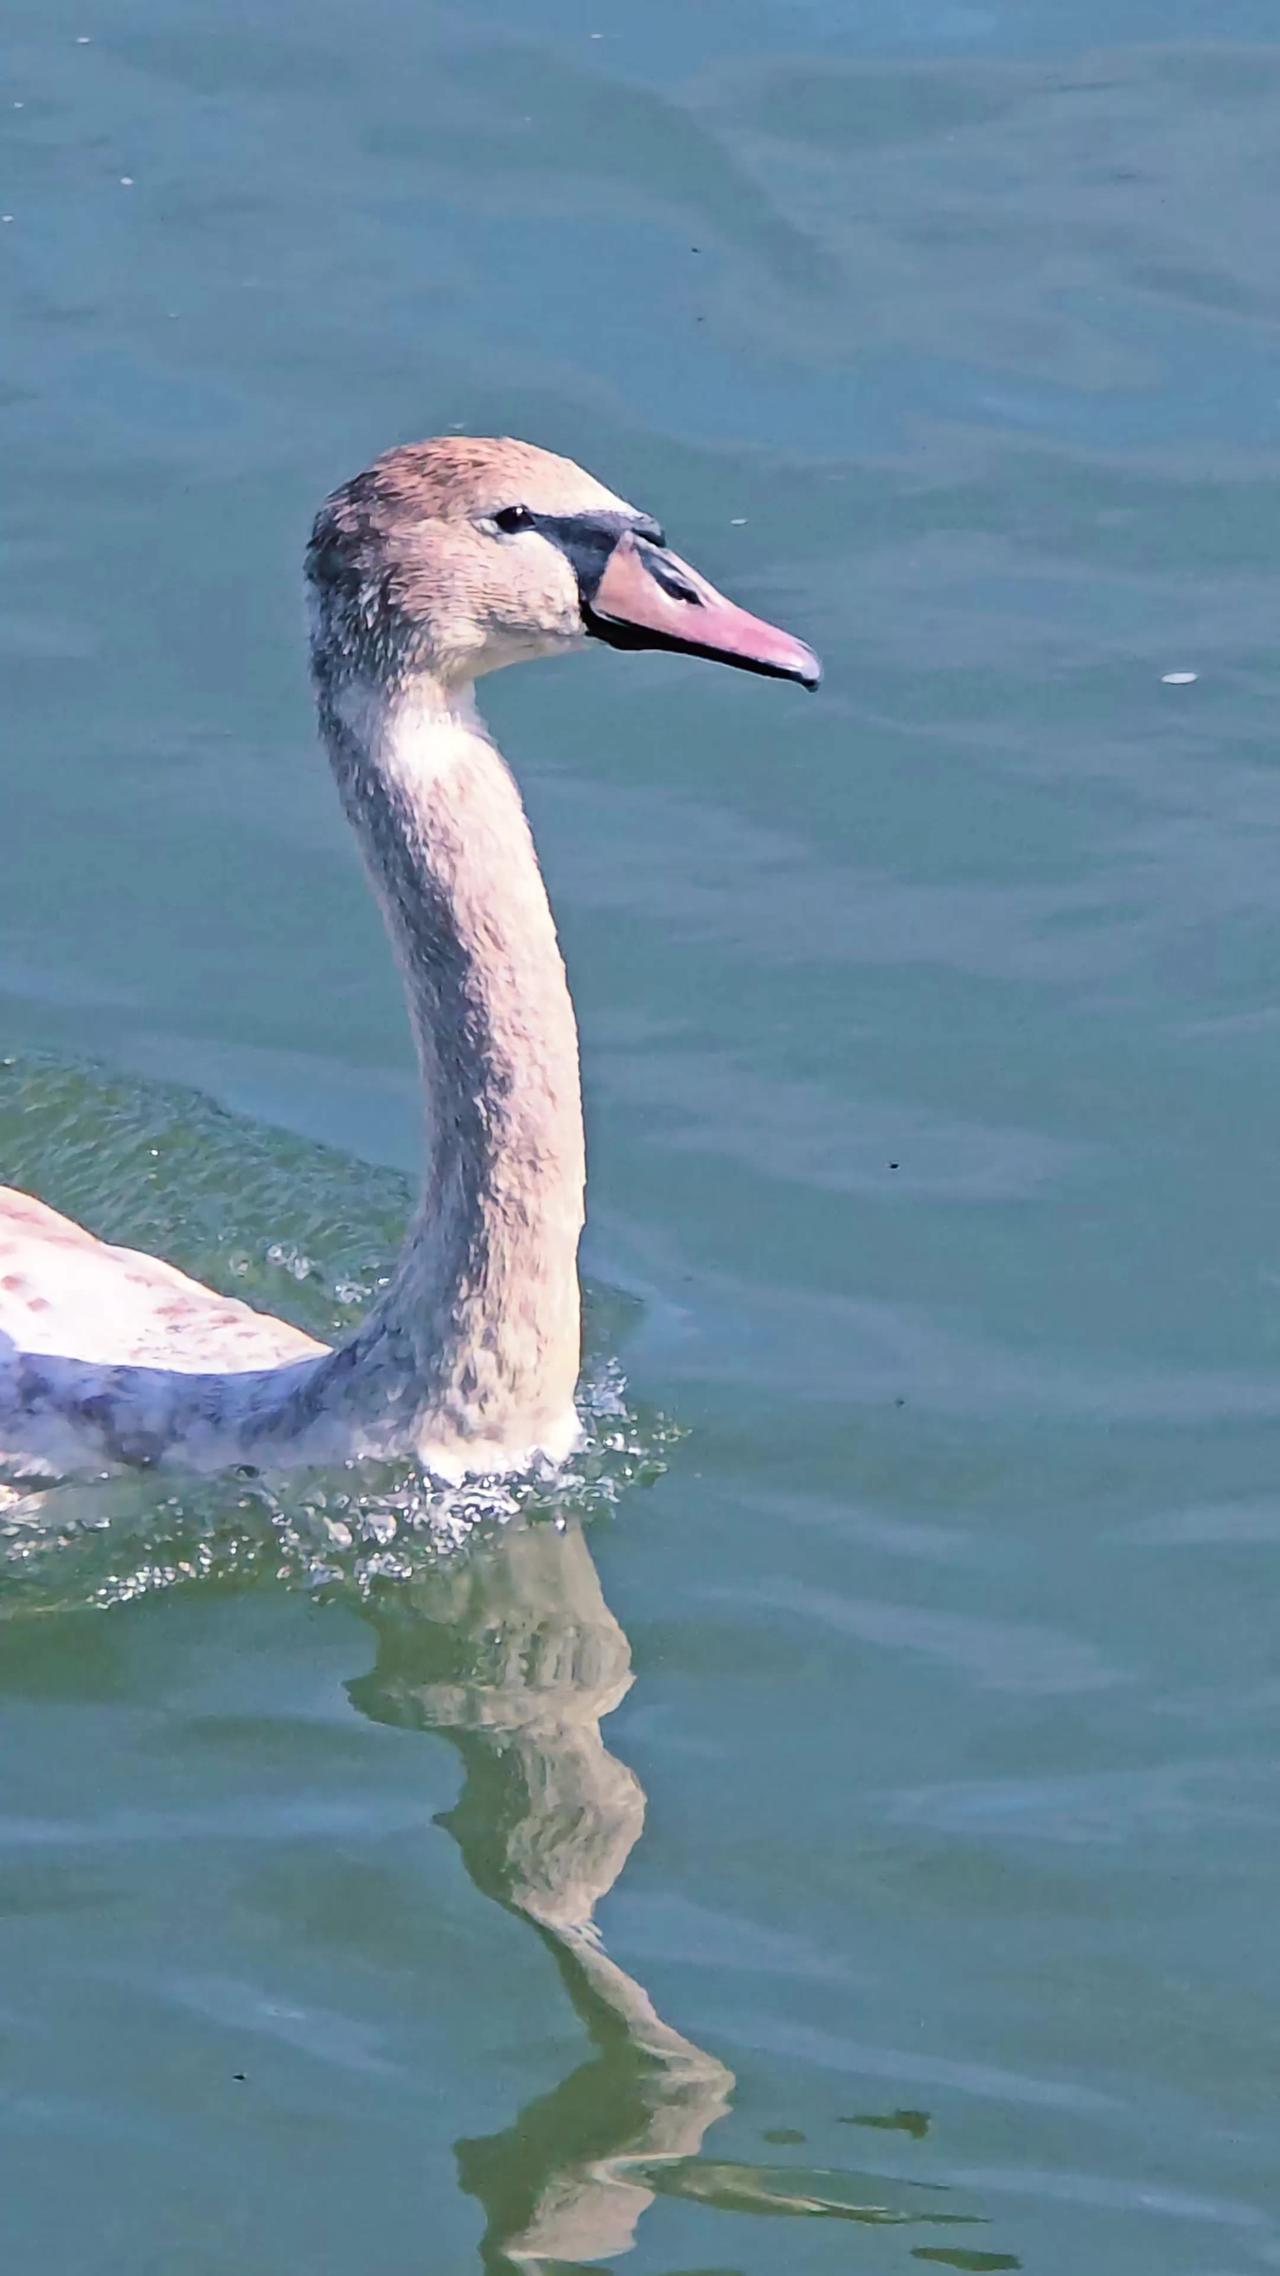 Young swan in the river / beautiful water bird in the water.